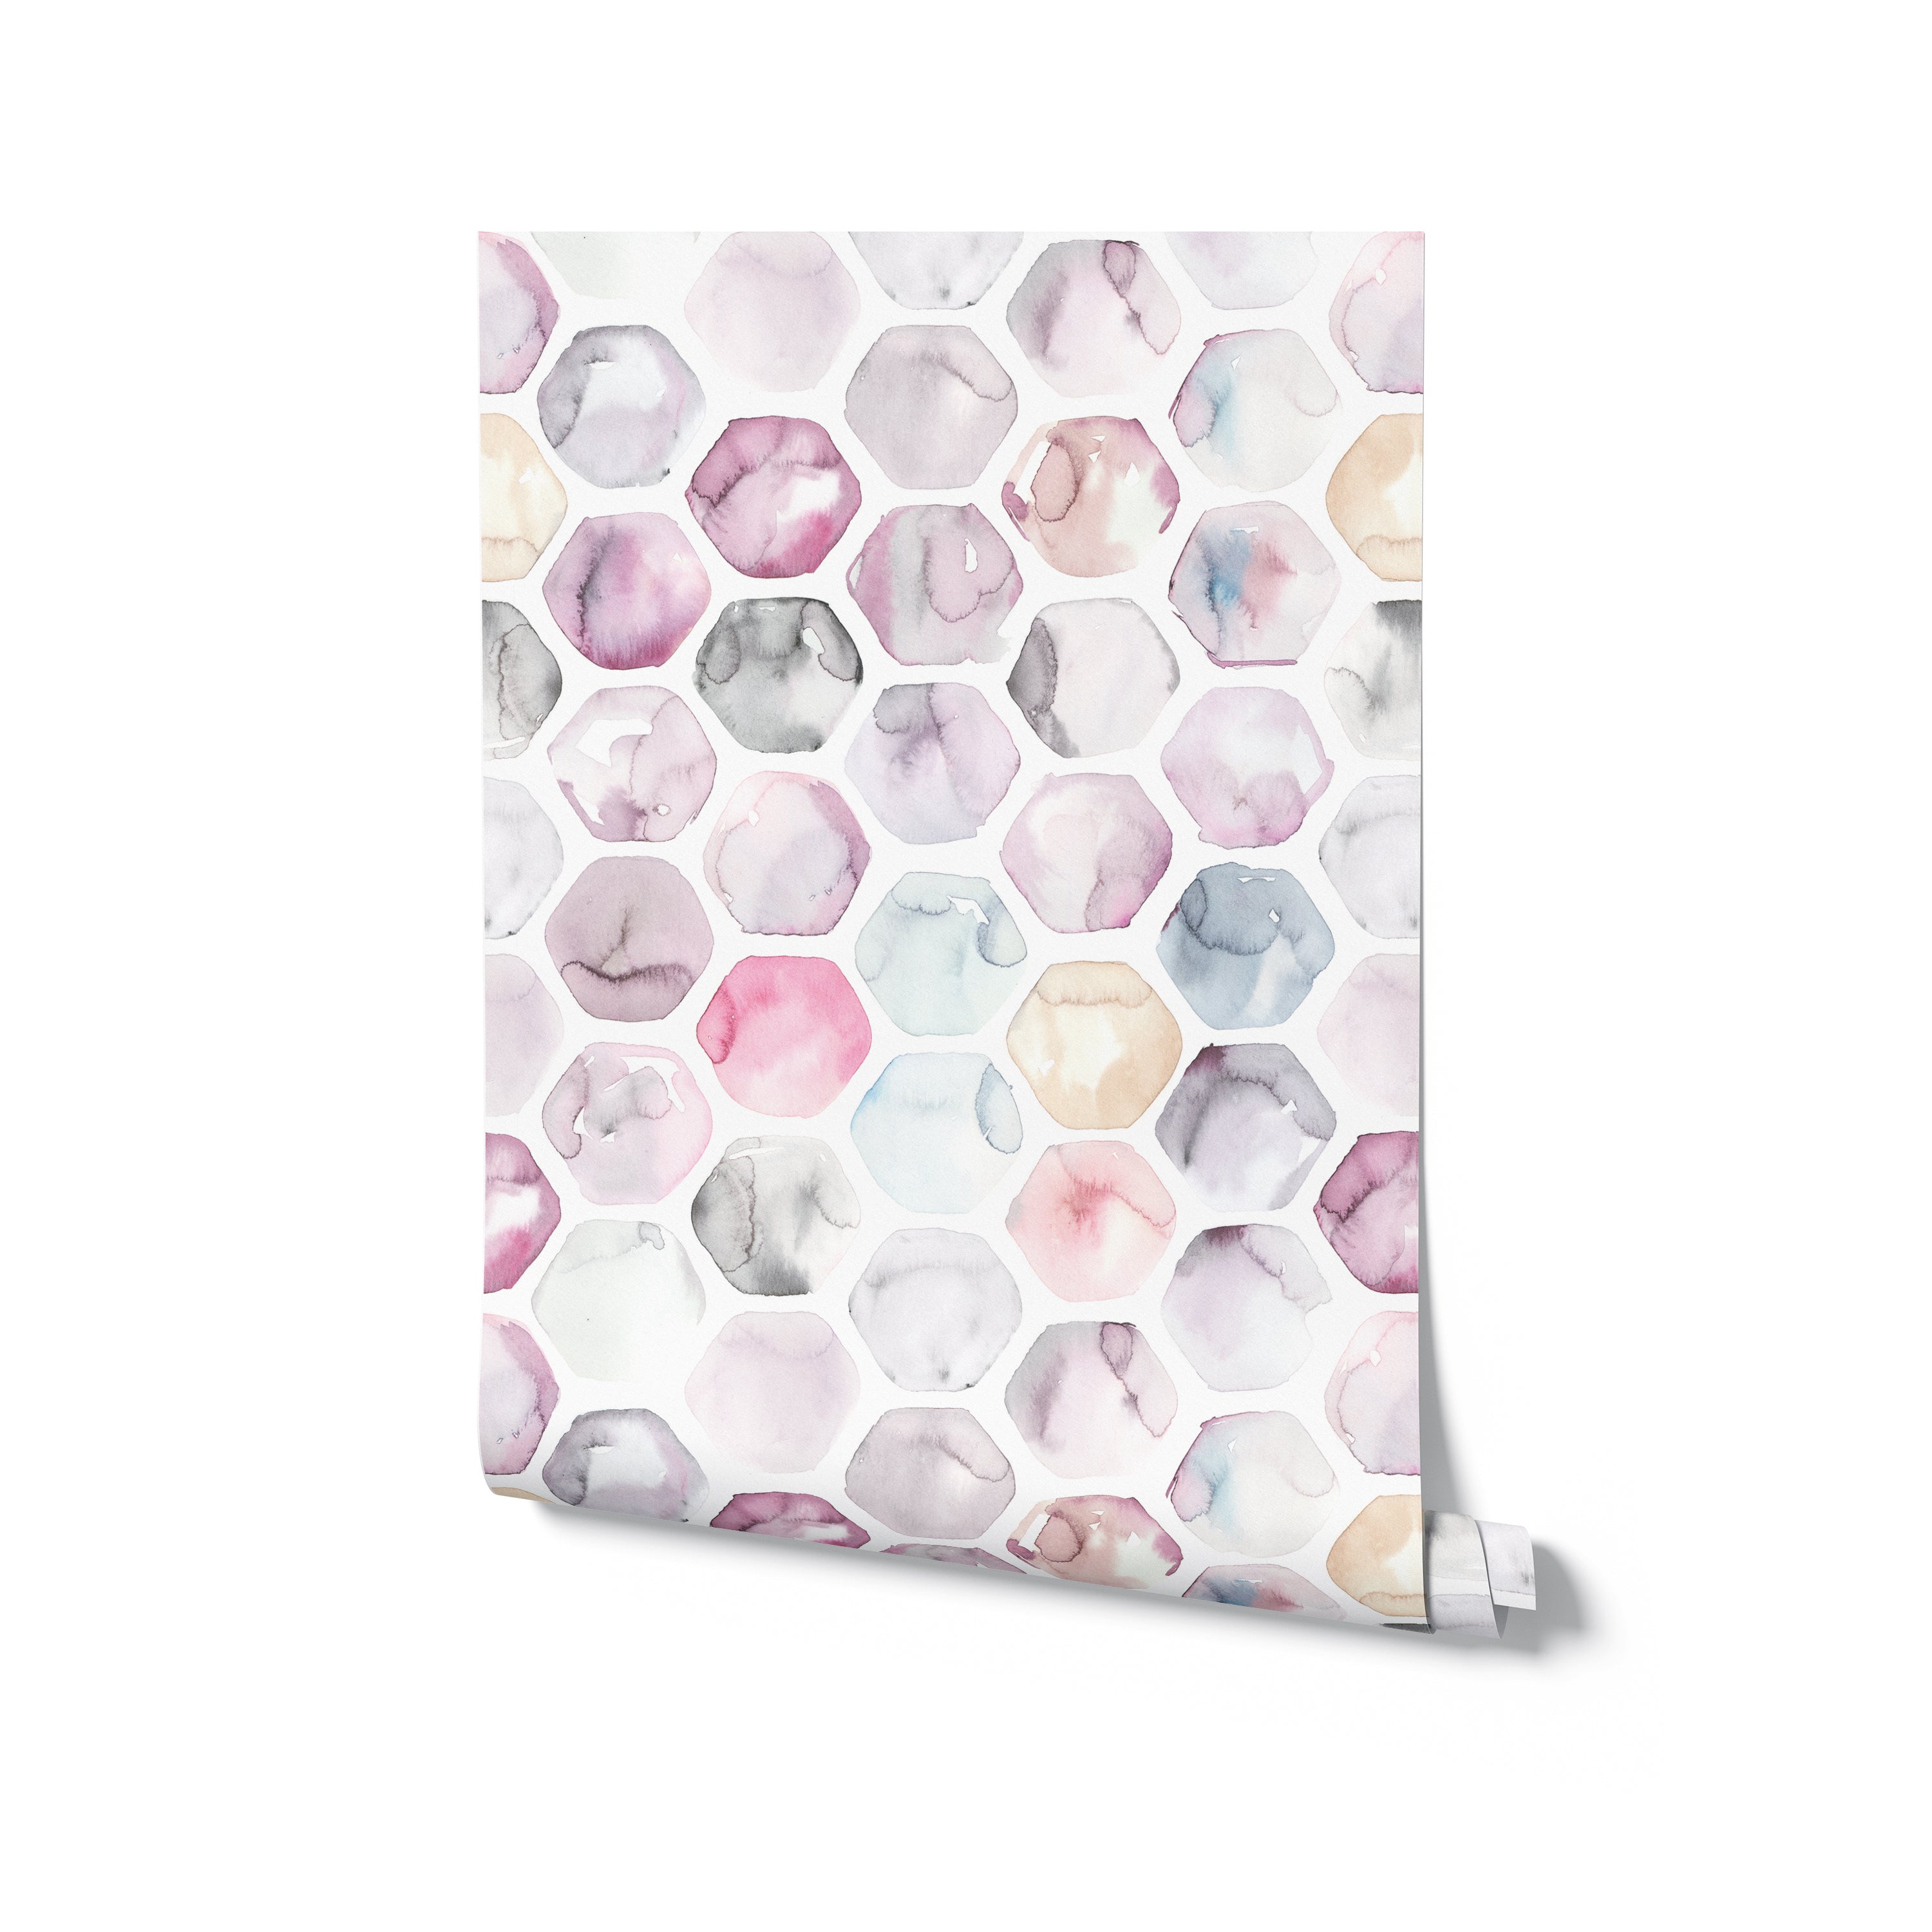 The Watercolour Honeycomb Wallpaper depicted in roll form, showing off the gentle, flowing watercolor hues in a honeycomb pattern, ready to add a touch of artistic flair and soft color to any room.